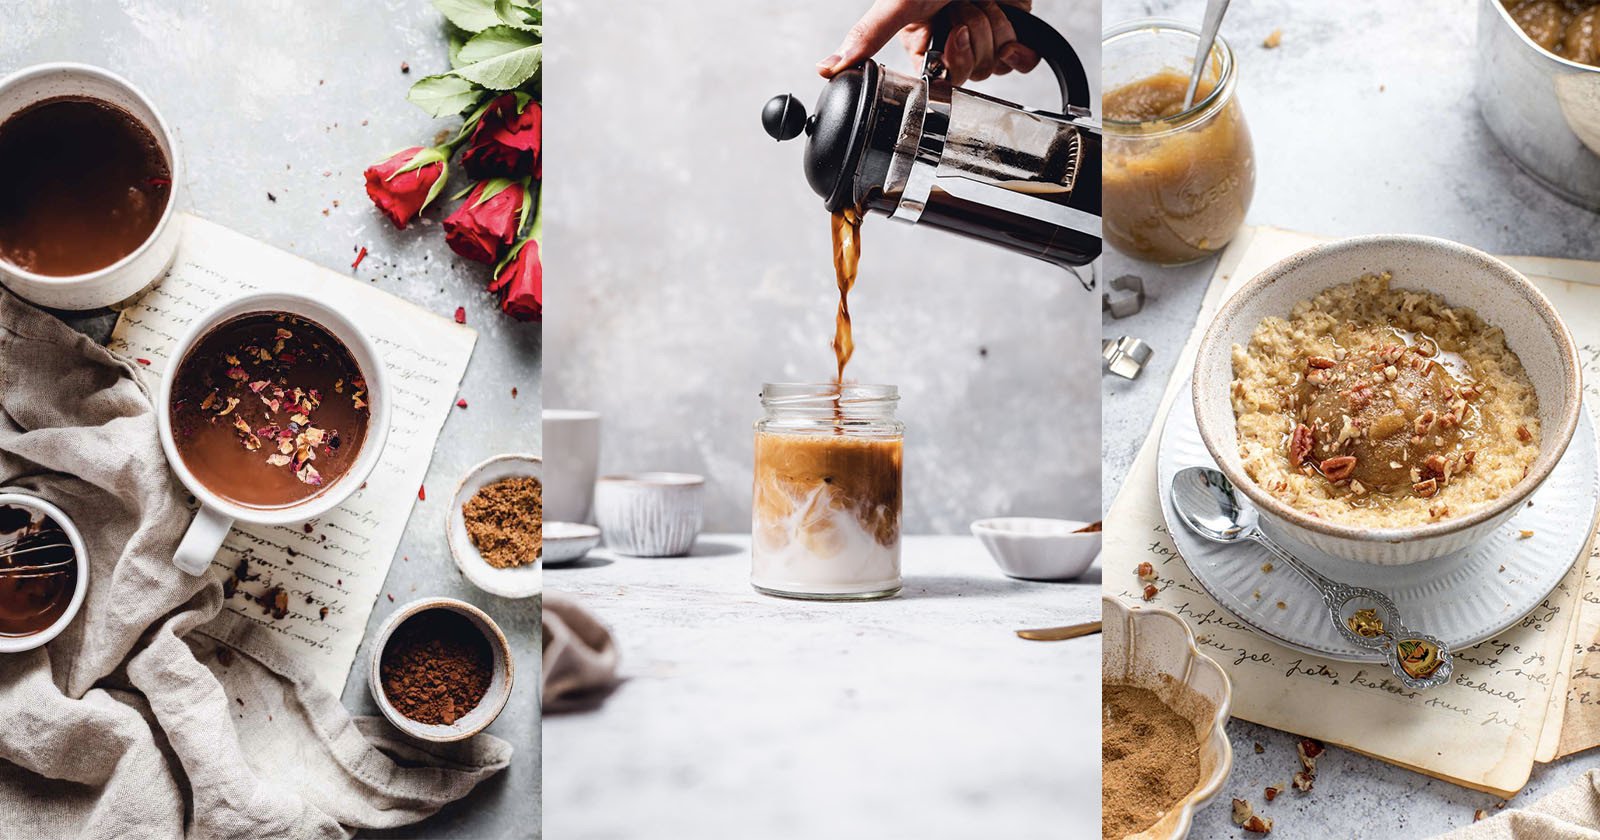 6 Versatile Food Photography Props That You Already Own